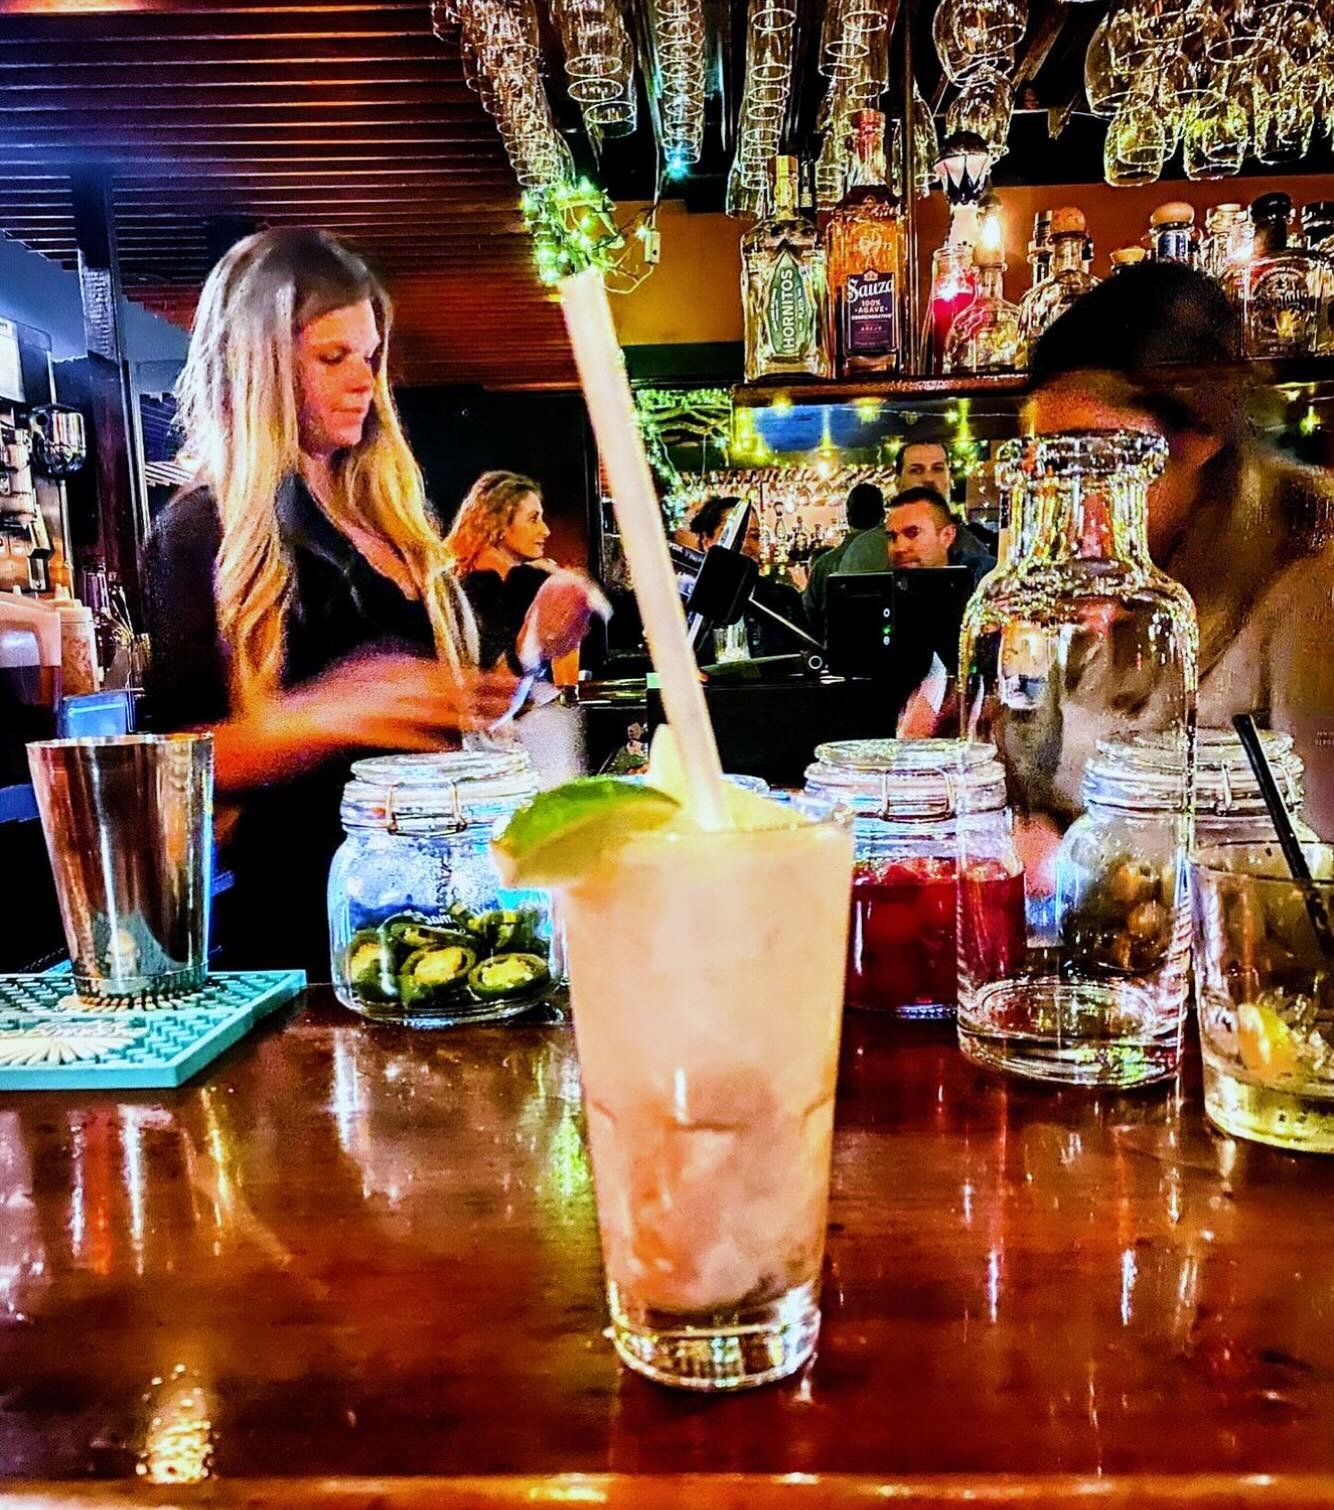 Sometimes you wanna go
Where everybody knows your name
And they&rsquo;re always glad you came&hellip;#tbt #santafeuptown #santafekingston #upstatenewyork #smalltownnewyork #cheerstvshow #cheers #beer  #bartender @cobymcn @philt535 @casamigos